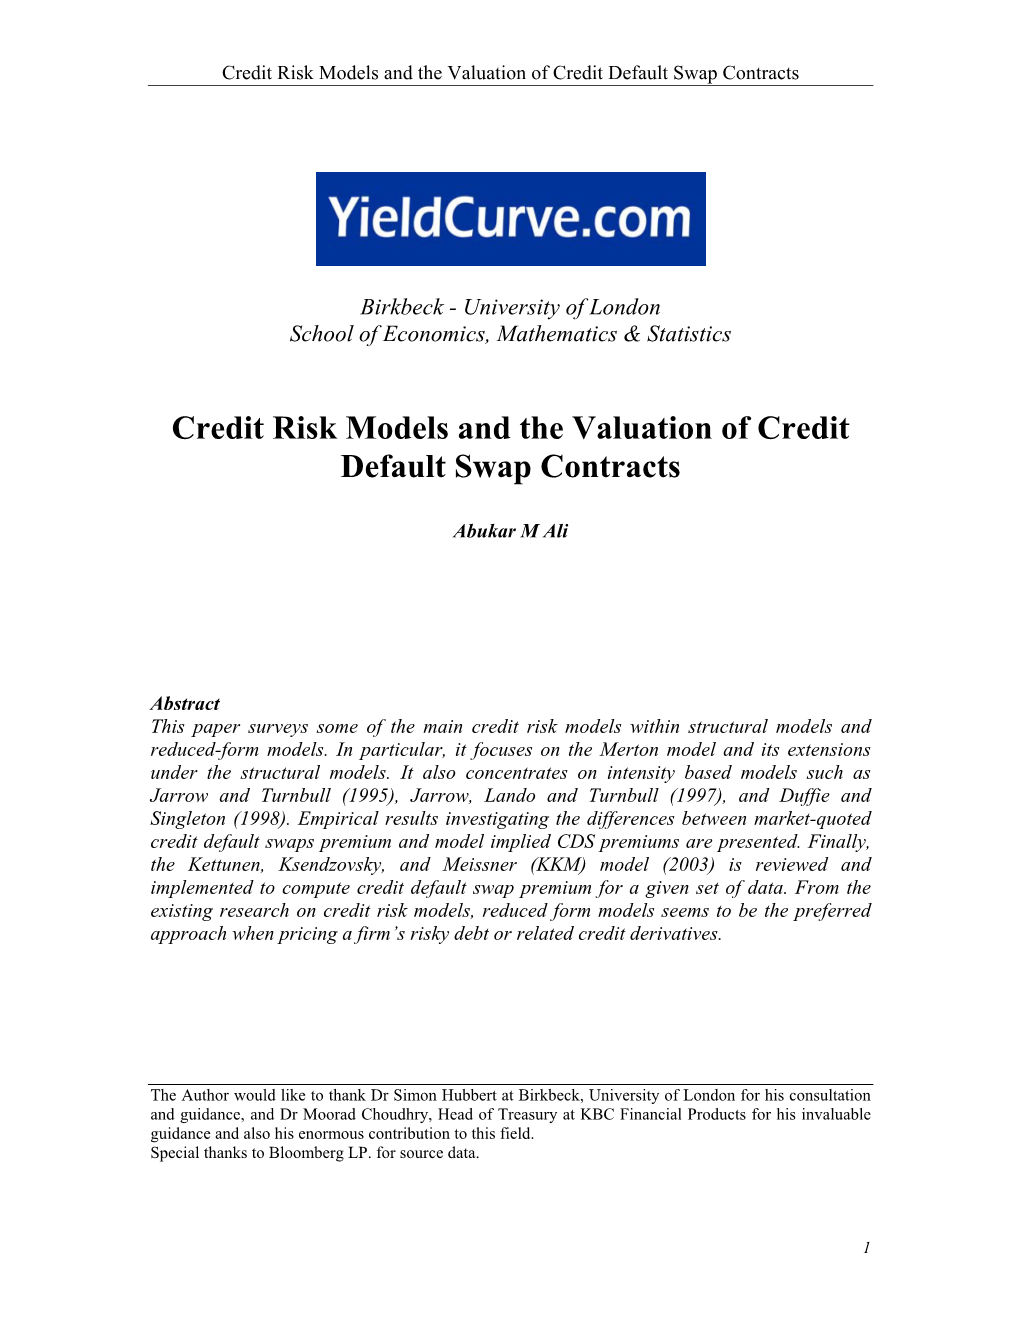 Credit Risk Models and Valuation of Credit Default Swap Contract